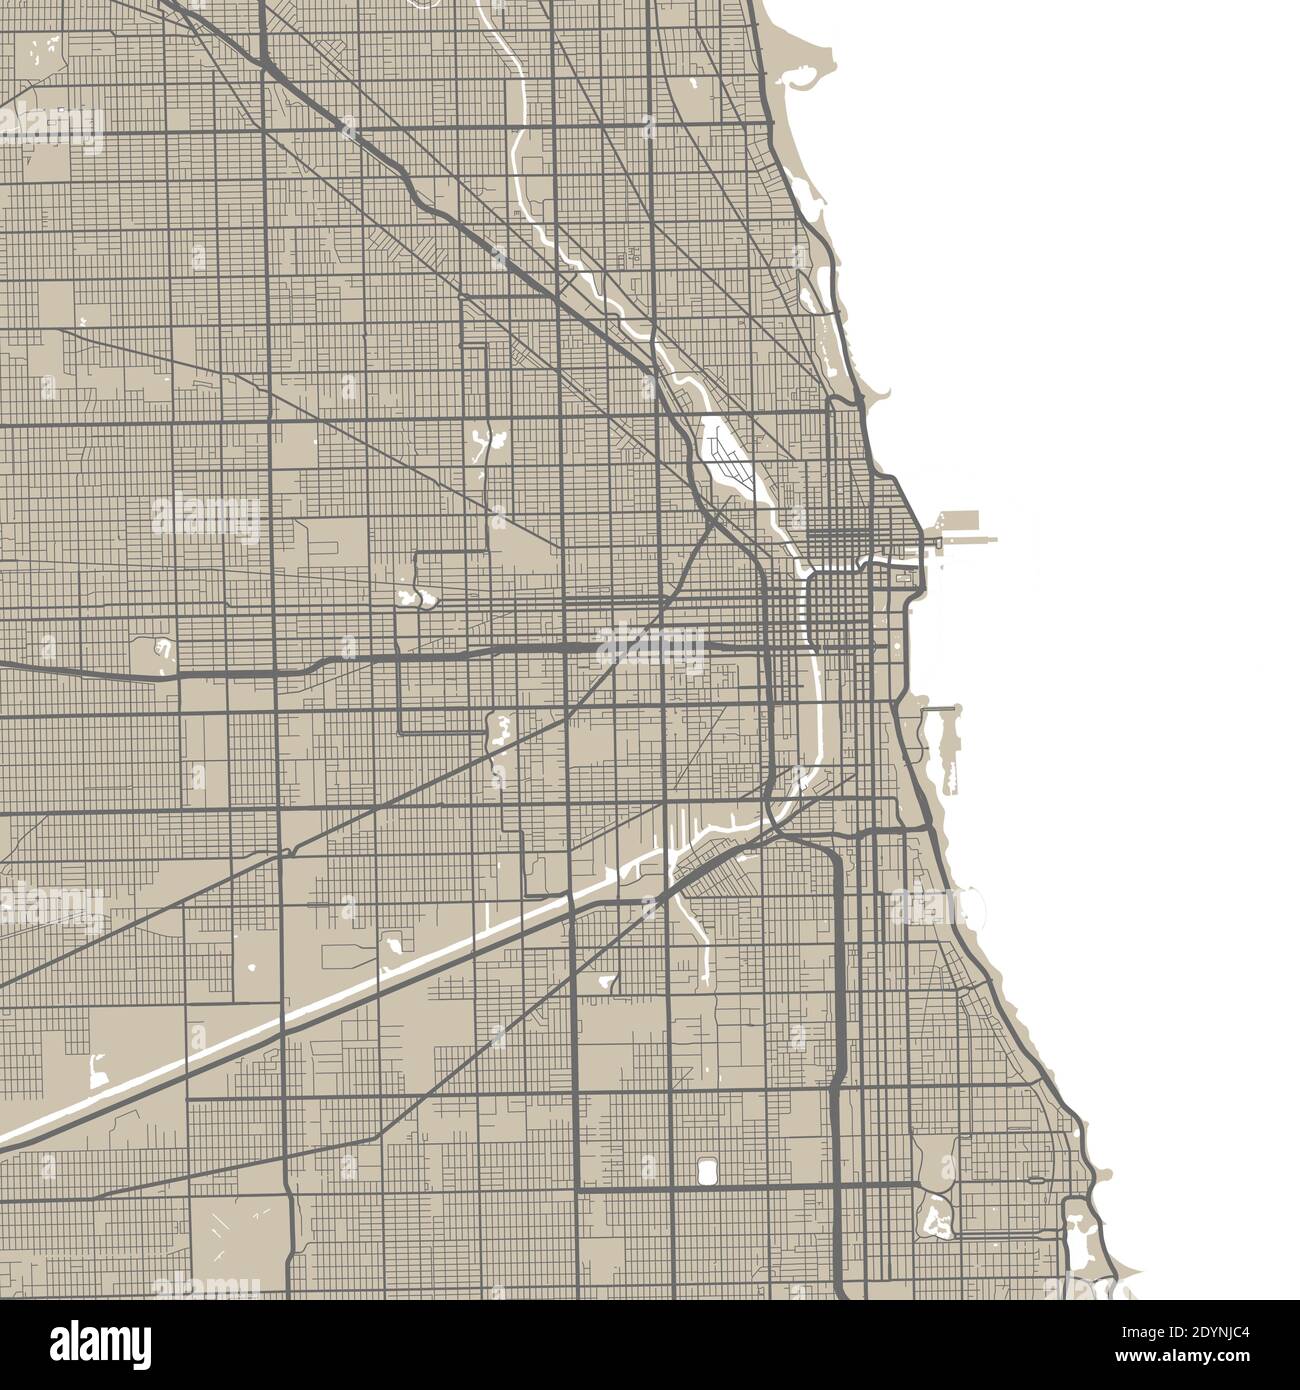 Chicago city map poster. Map of Chicago street map poster. Chicago map vector illustration. Stock Vector